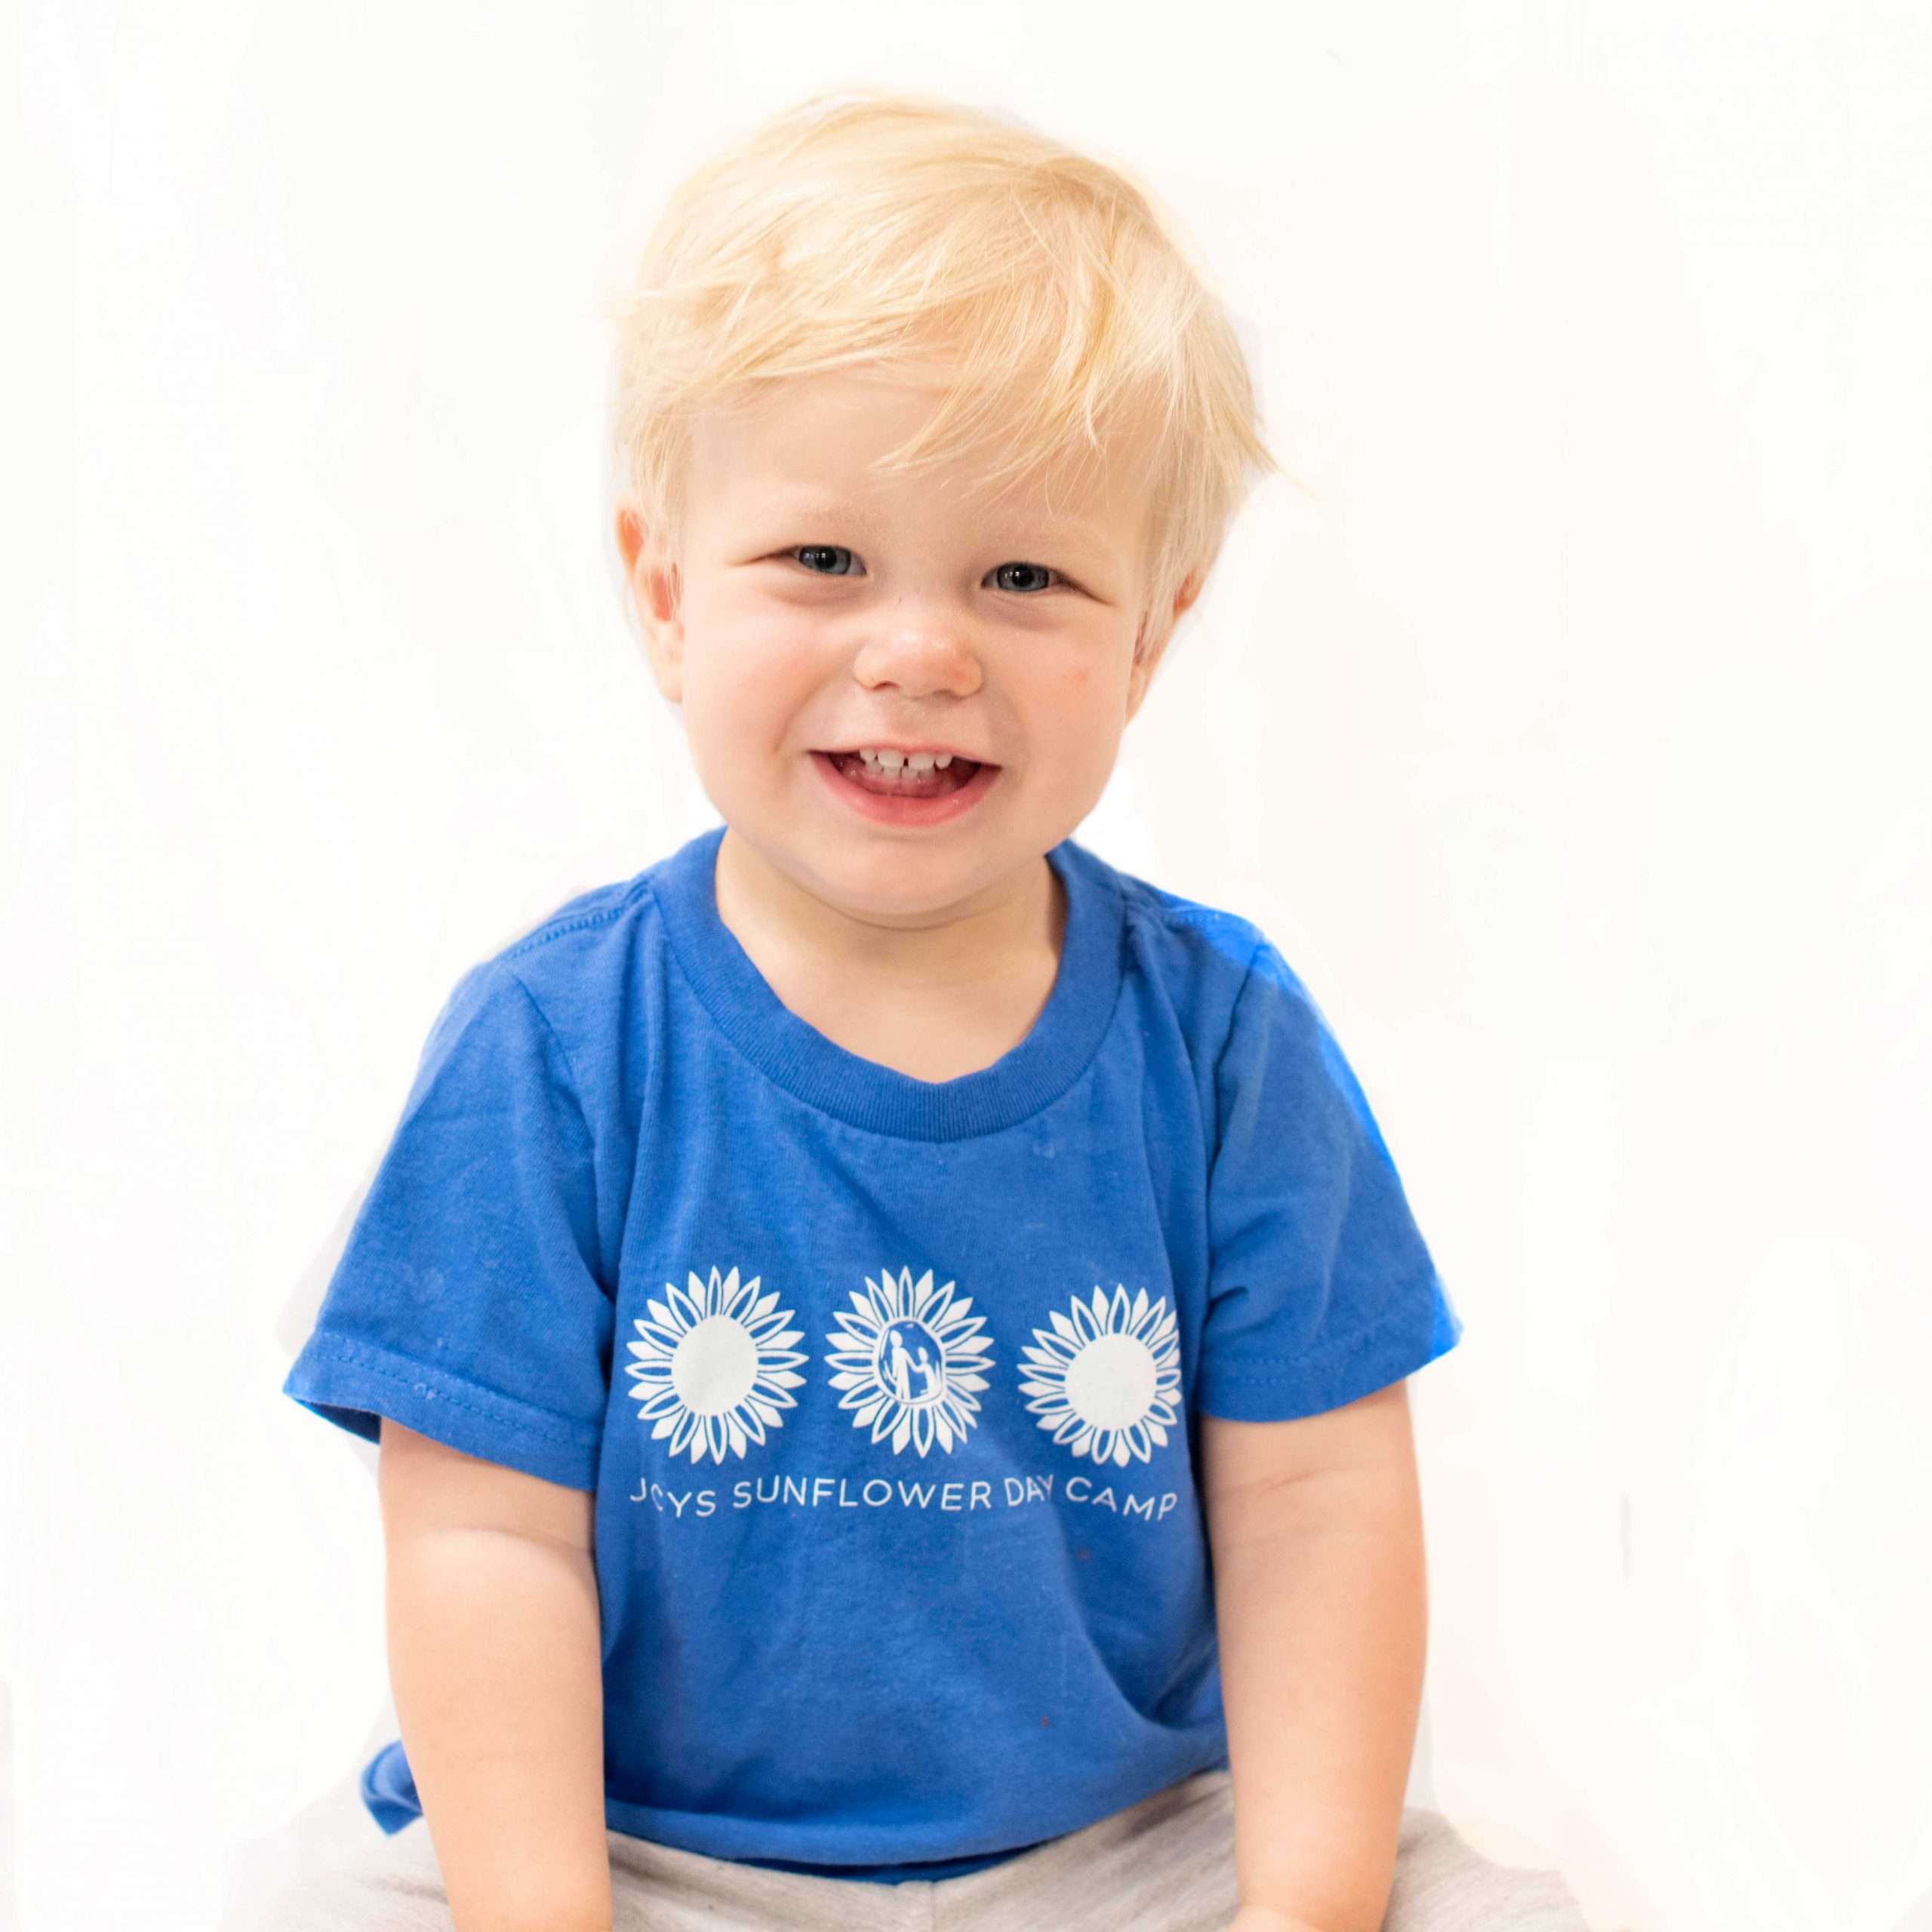 Boy looking at camera and smiling, wearing a blue JCYS Sunflower Day Camp shirt.